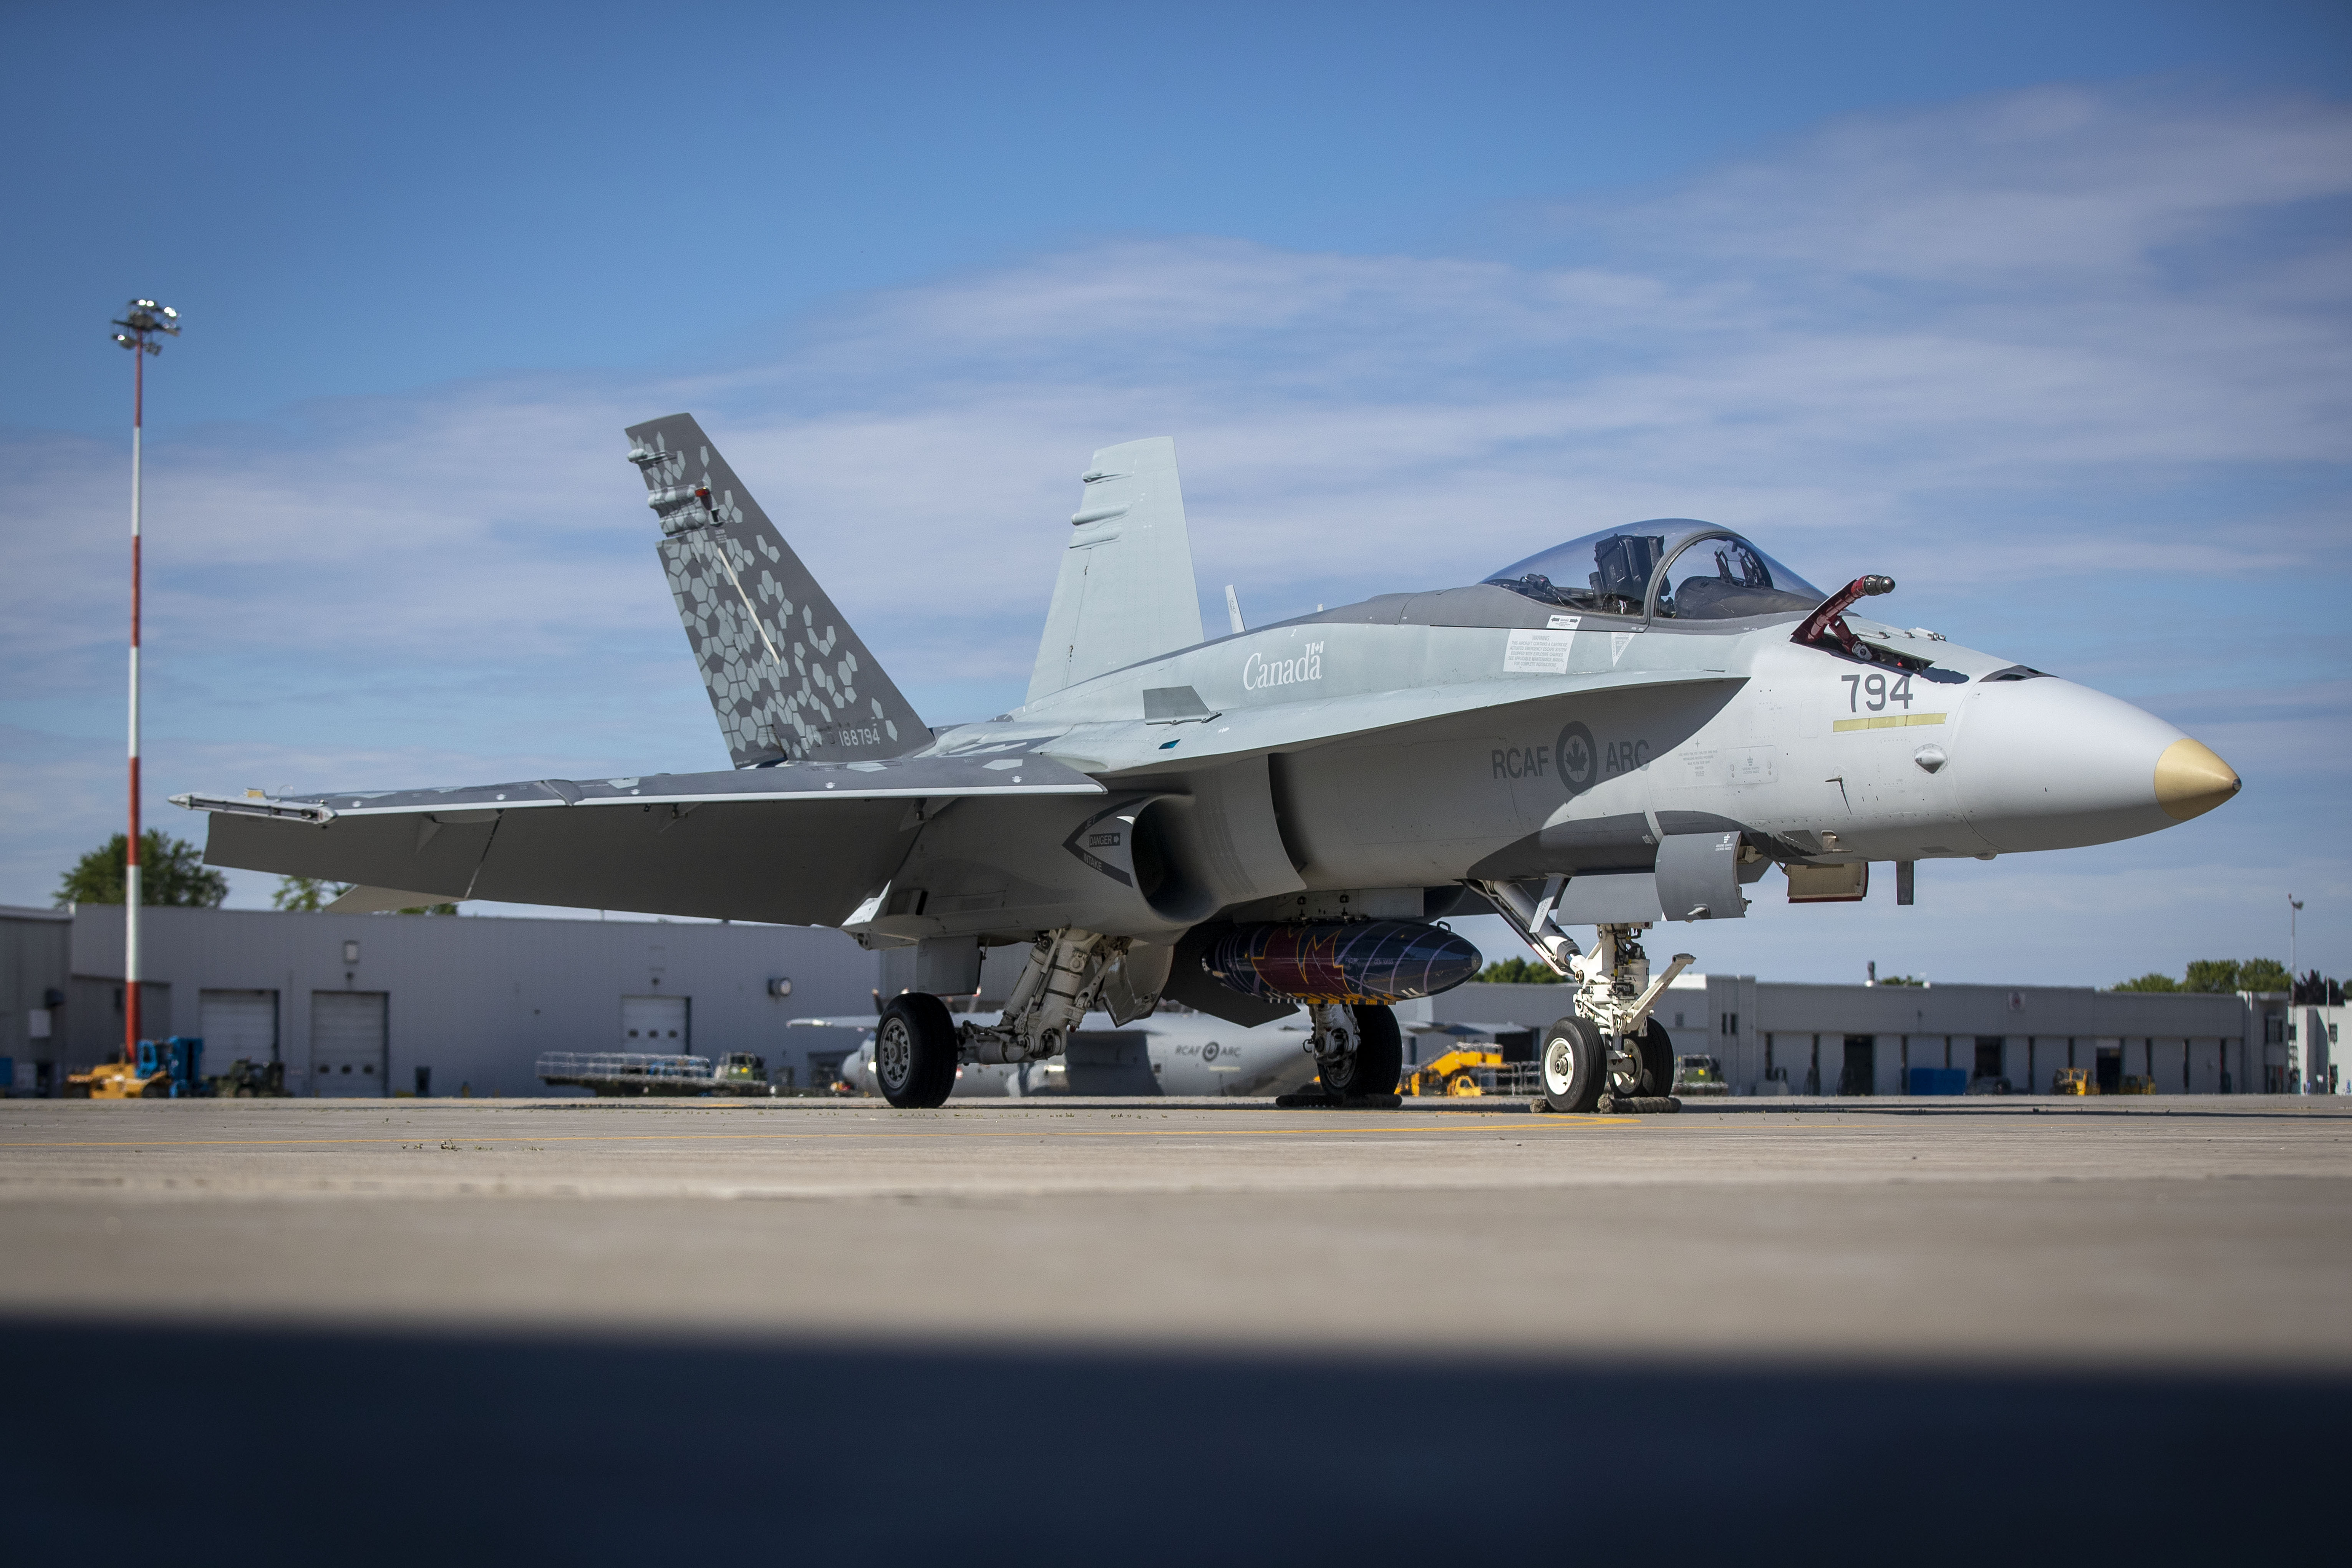 Calgary’s Arcfield Canada awarded $211 million for upkeep on CF-18 fighter jets